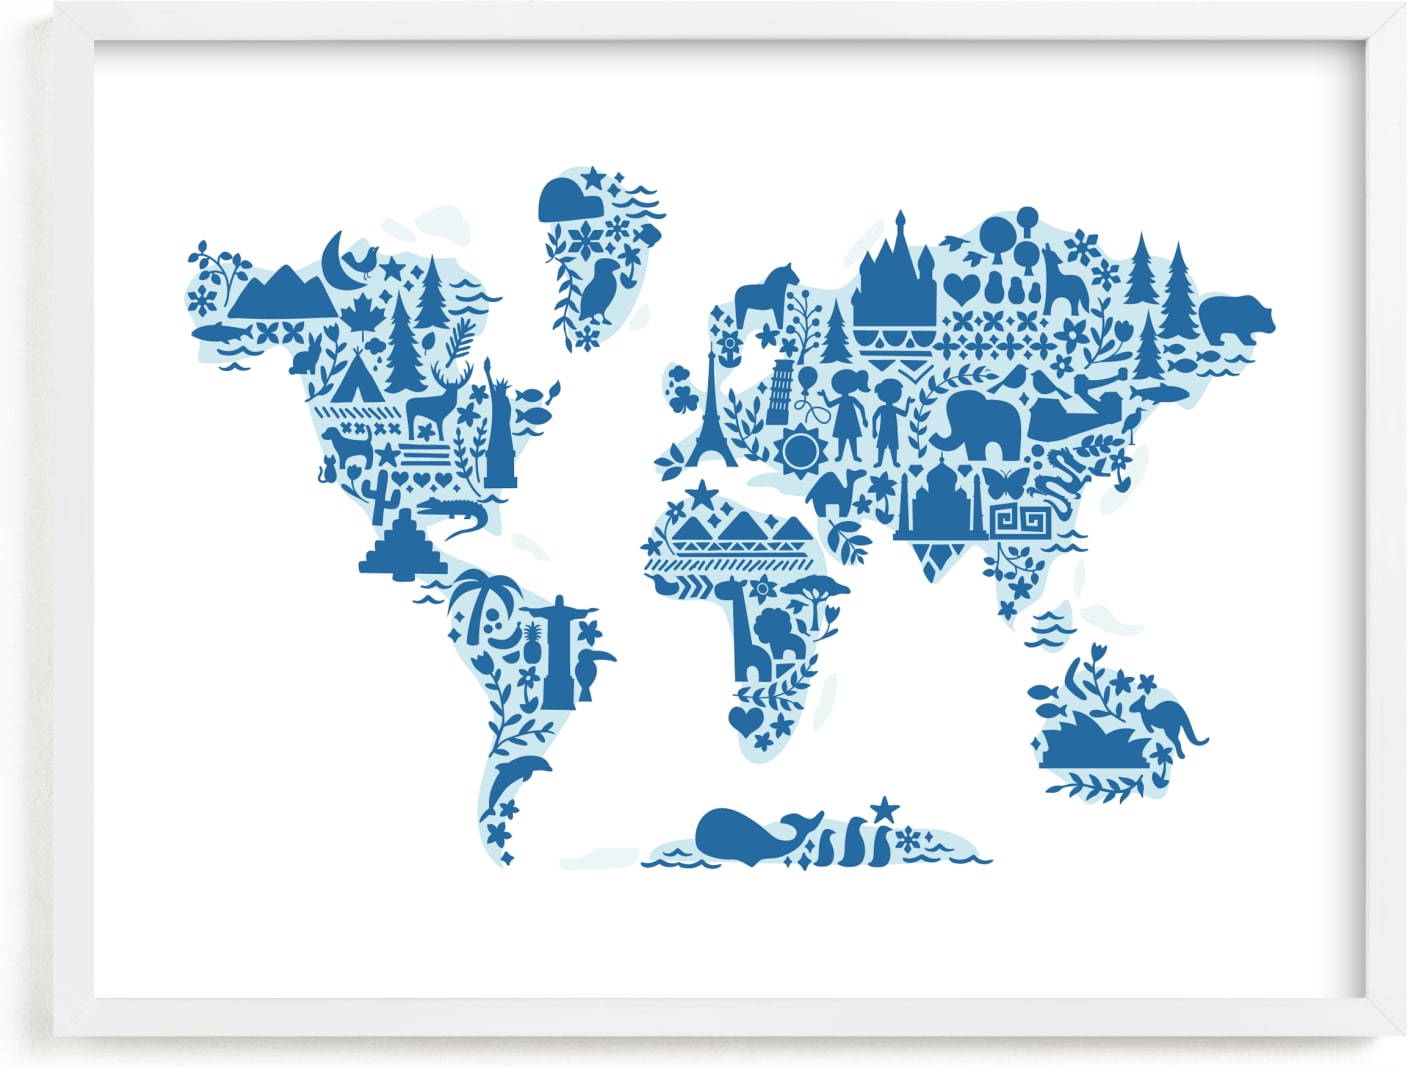 This is a blue art by Jessie Steury called Little Big World Map.